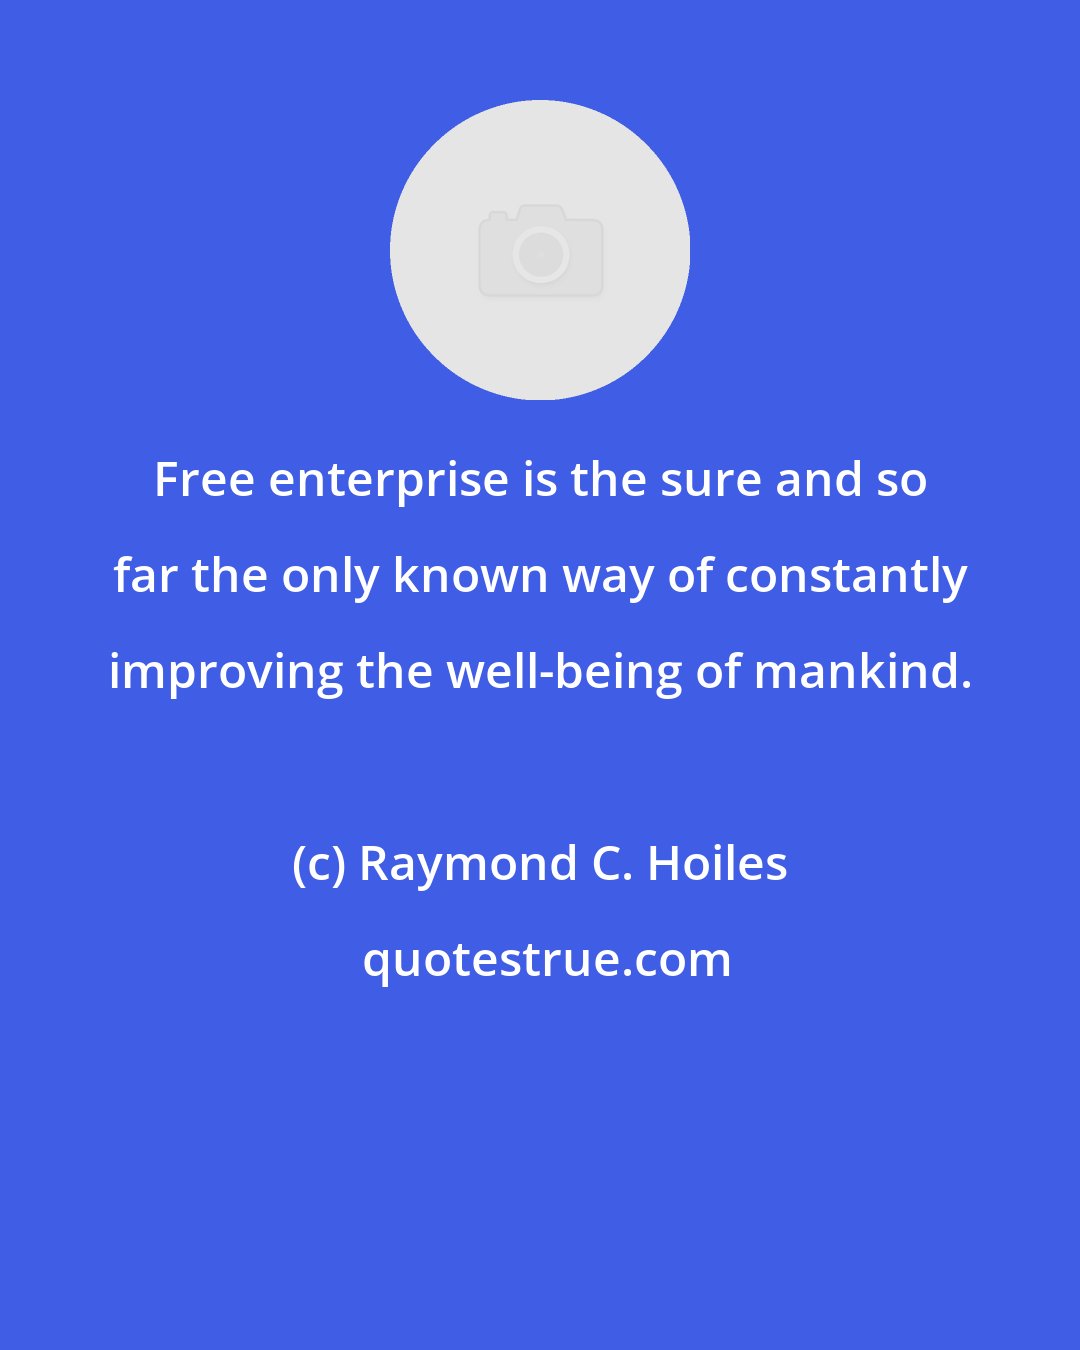 Raymond C. Hoiles: Free enterprise is the sure and so far the only known way of constantly improving the well-being of mankind.